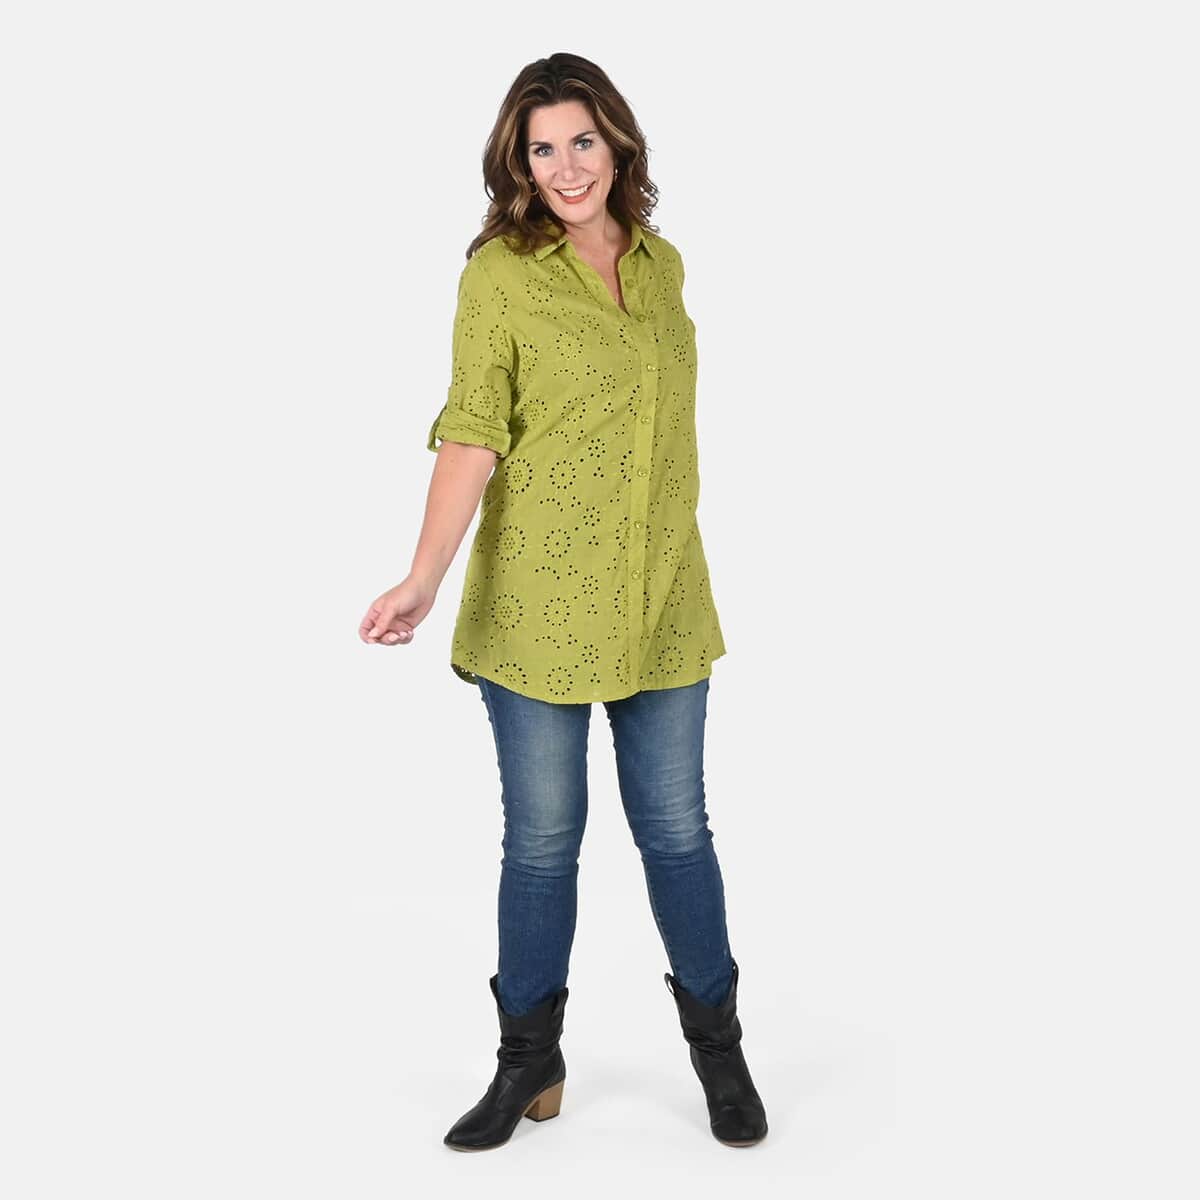 Tamsy Green Erin Eyelet Tunic - 1X image number 0